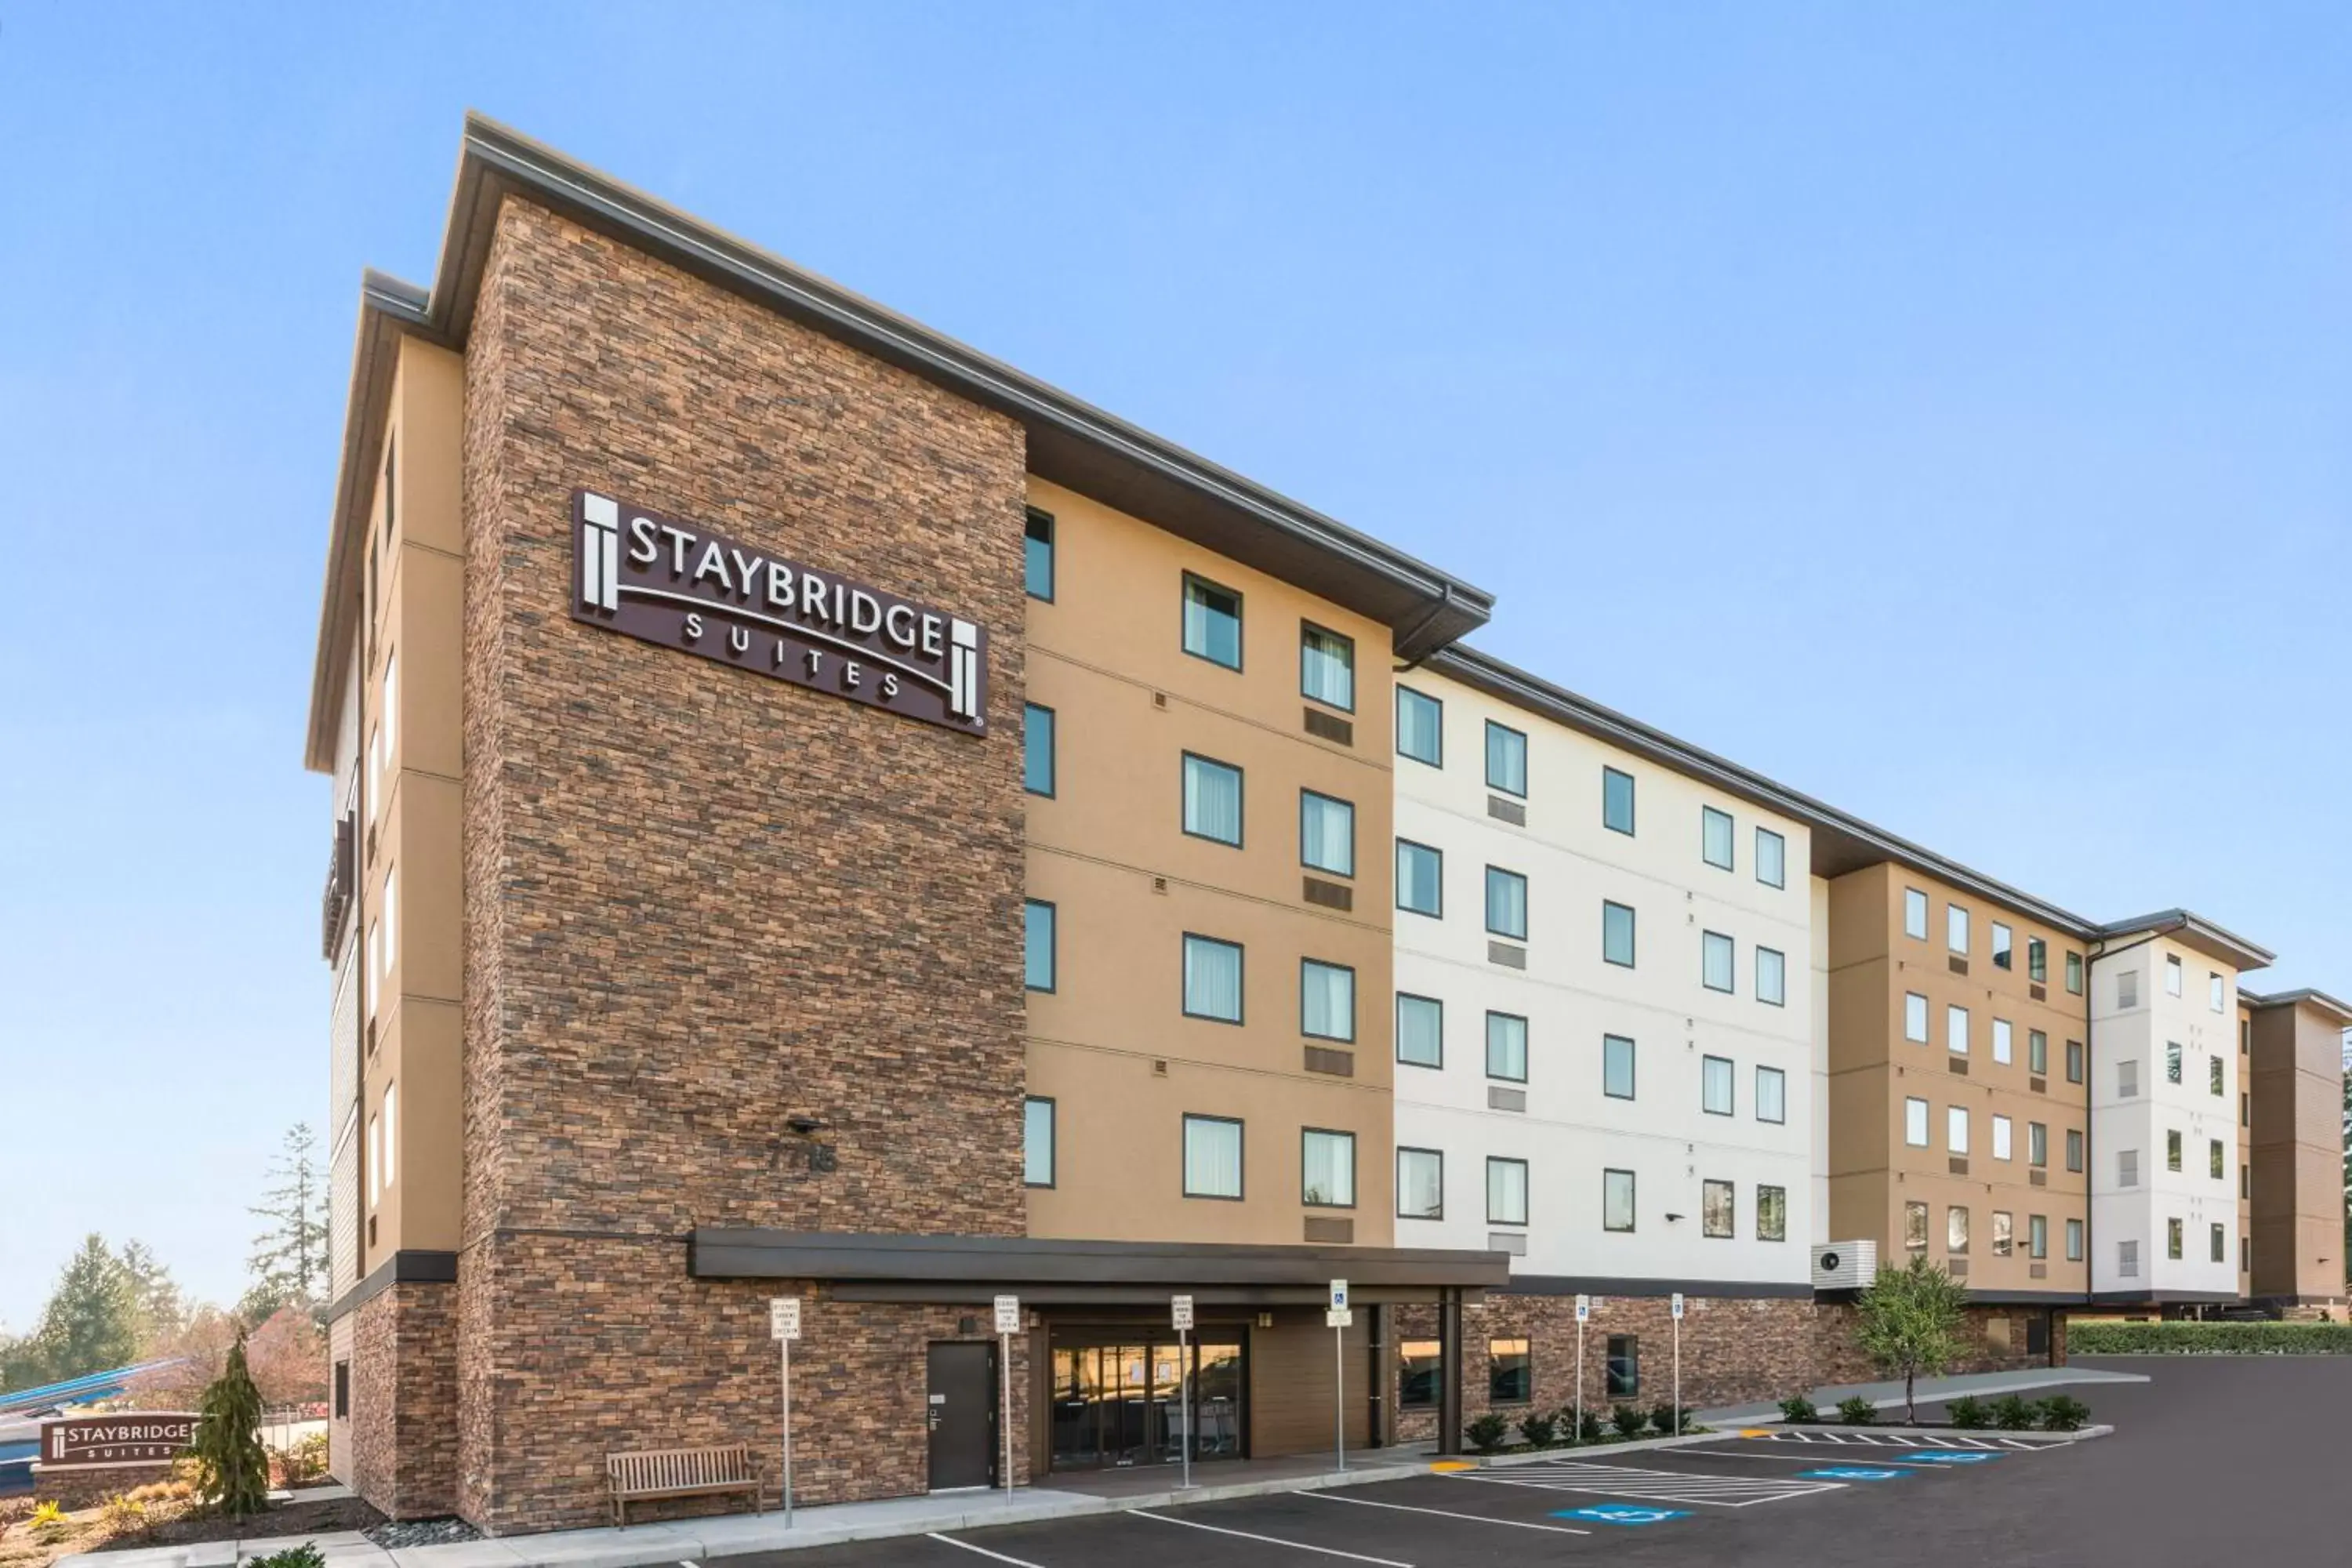 Property building in Staybridge Suites - Orenco Station, an IHG Hotel